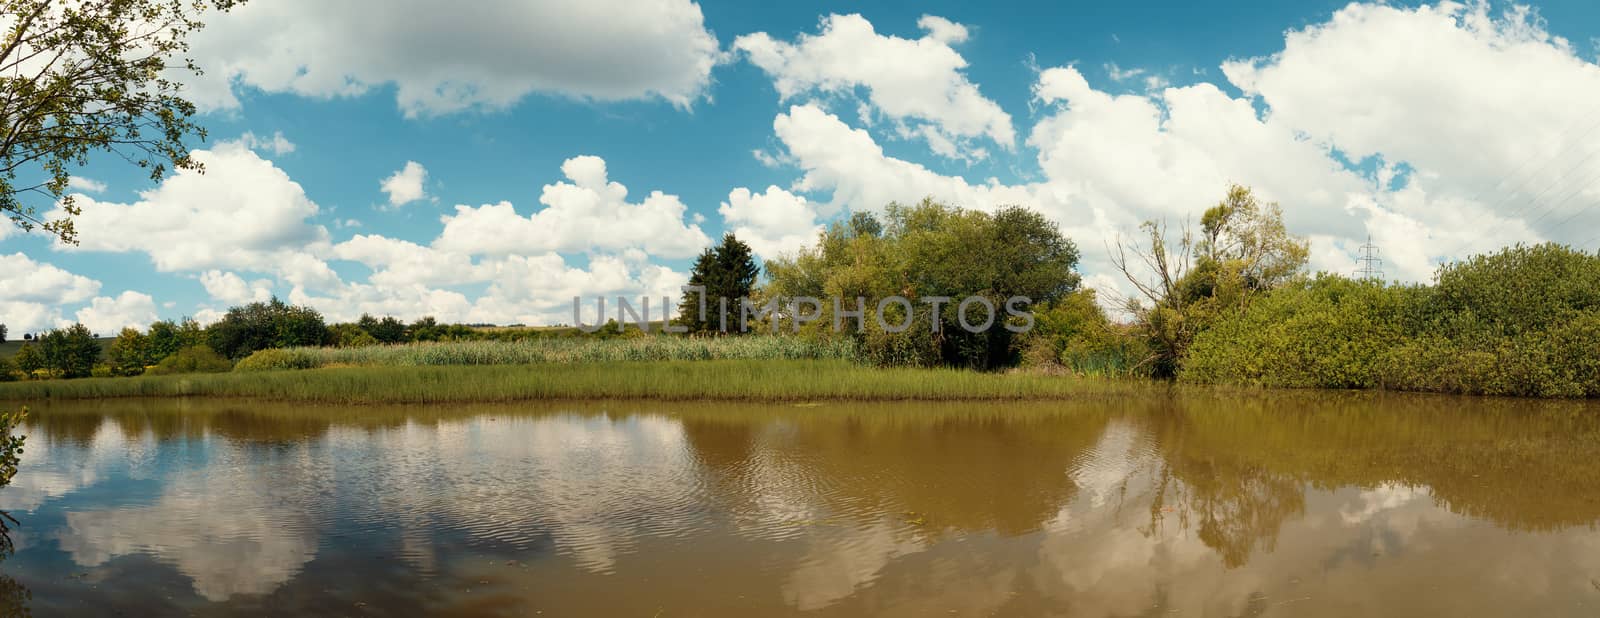 reeds at the pond in summertime by artush